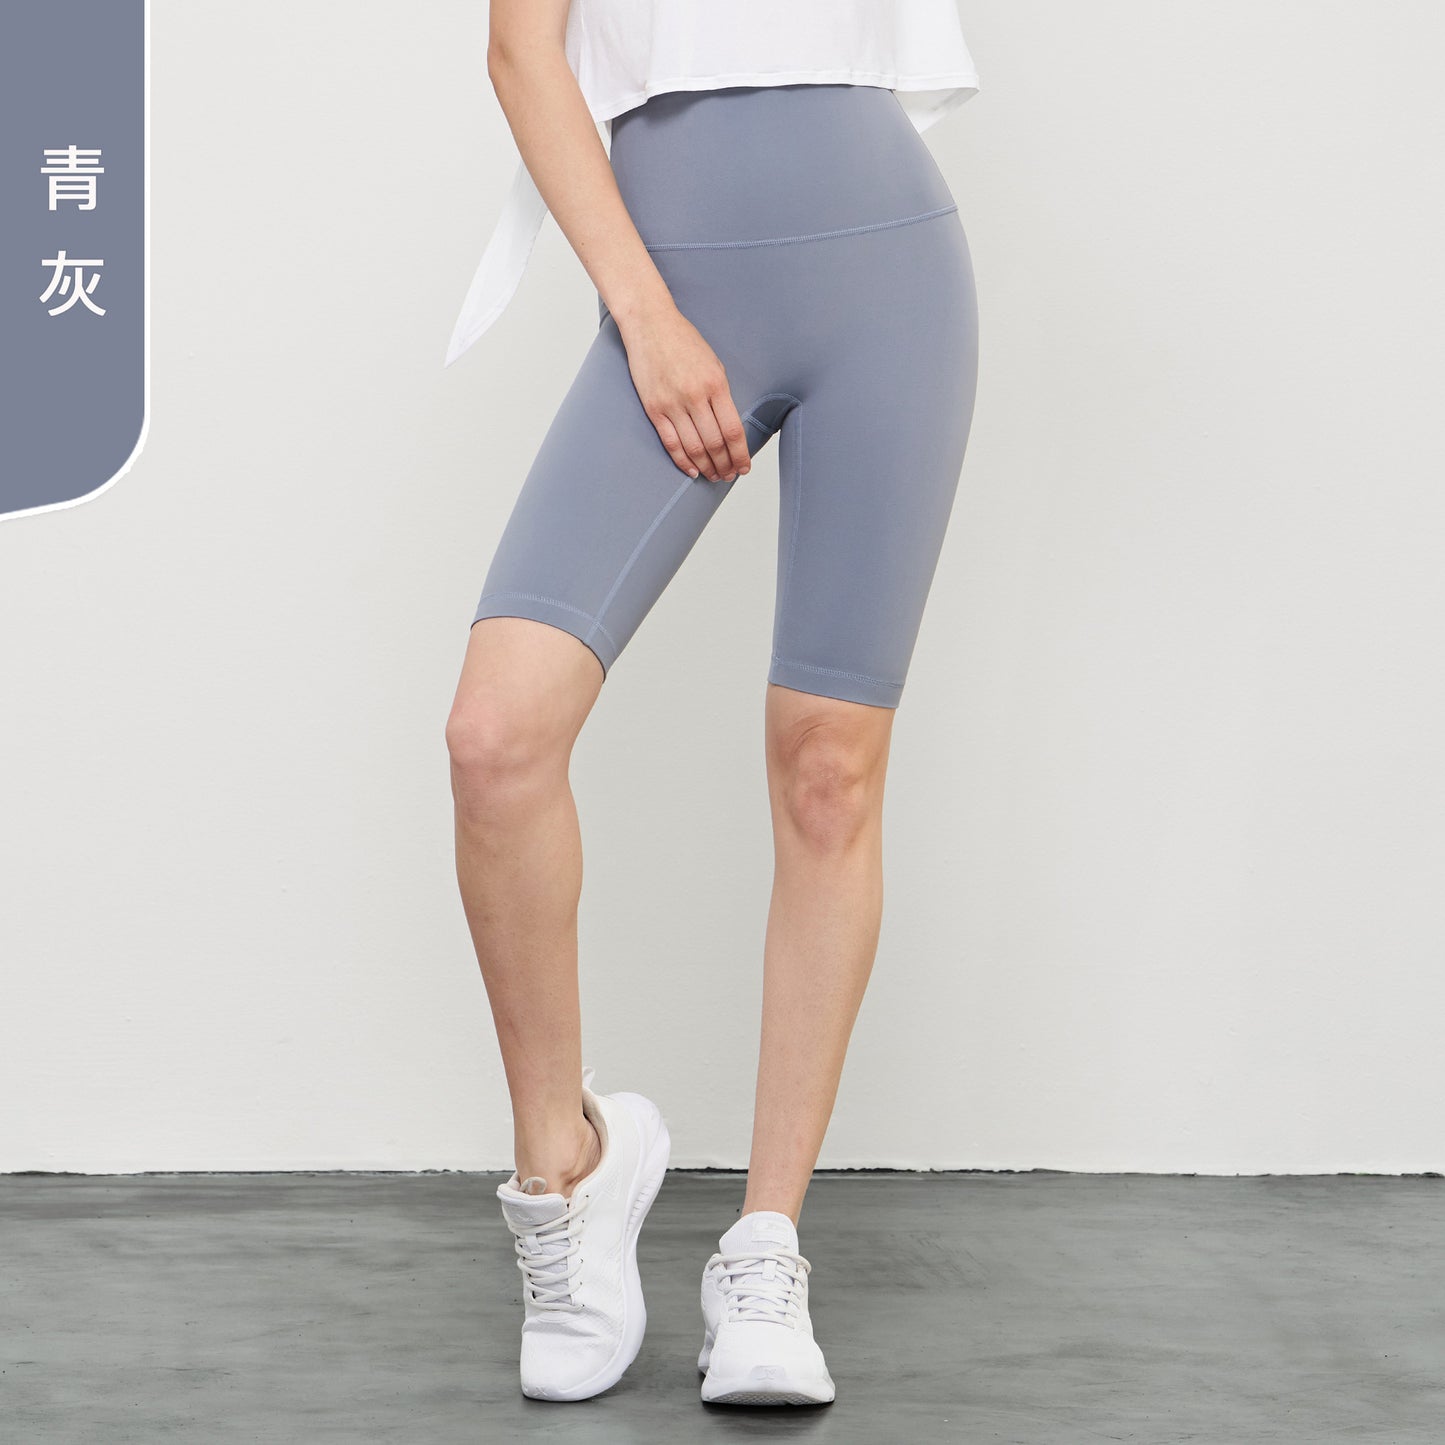 2023.08 Link 1 36 colors yoga five-point pants nude high waist no embarrassing line sports fitness pants women